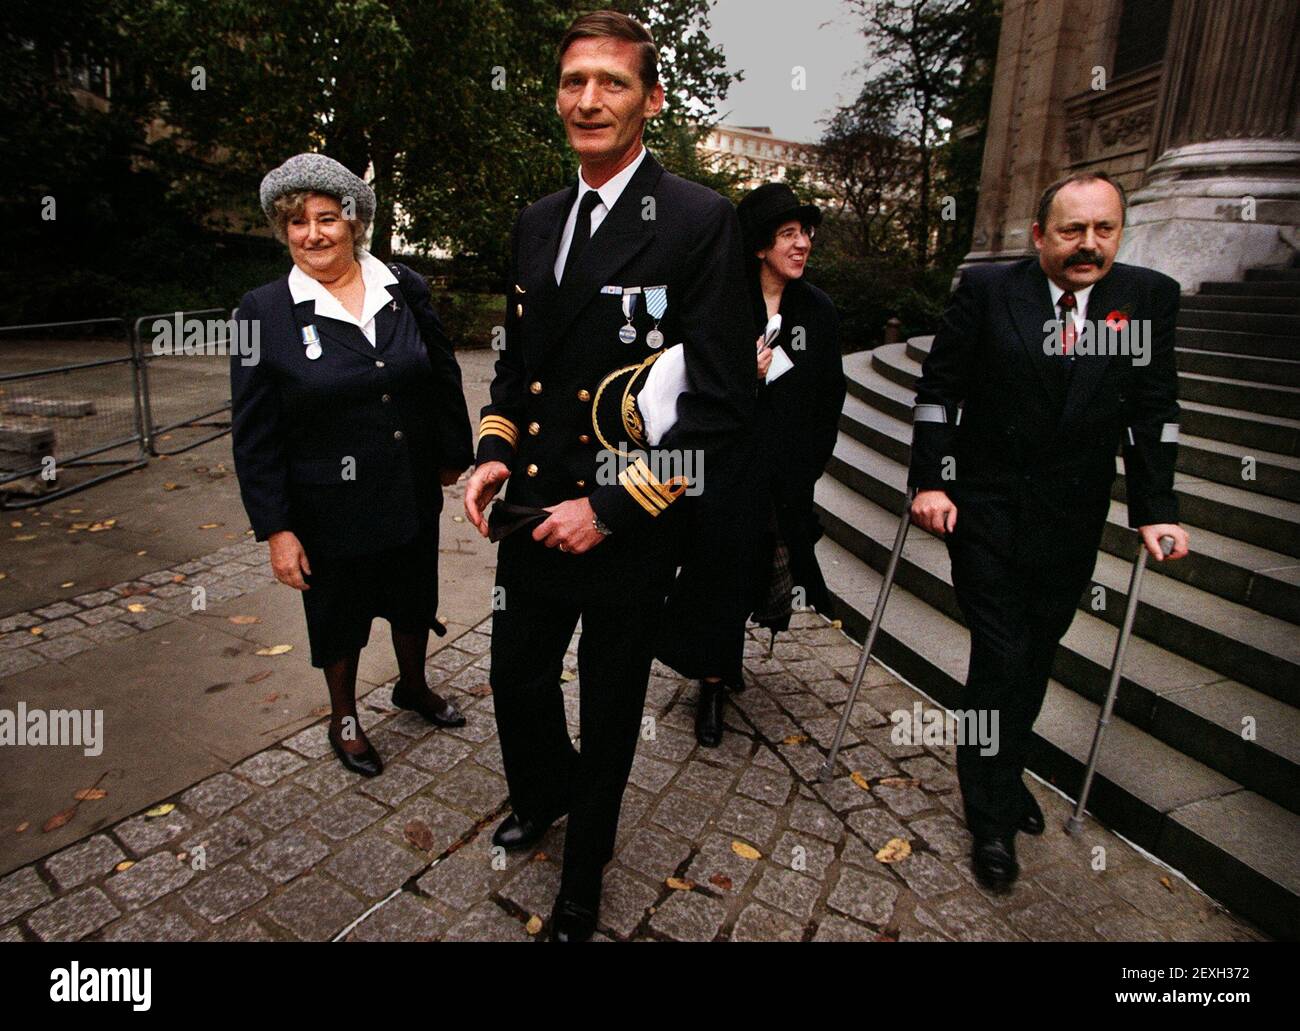 Argentine and British veterans leaving St Pauls including   Navel Captian Alvaro Gonzalez Lonzieme who survived the sinking of the Belgrano. Stock Photo